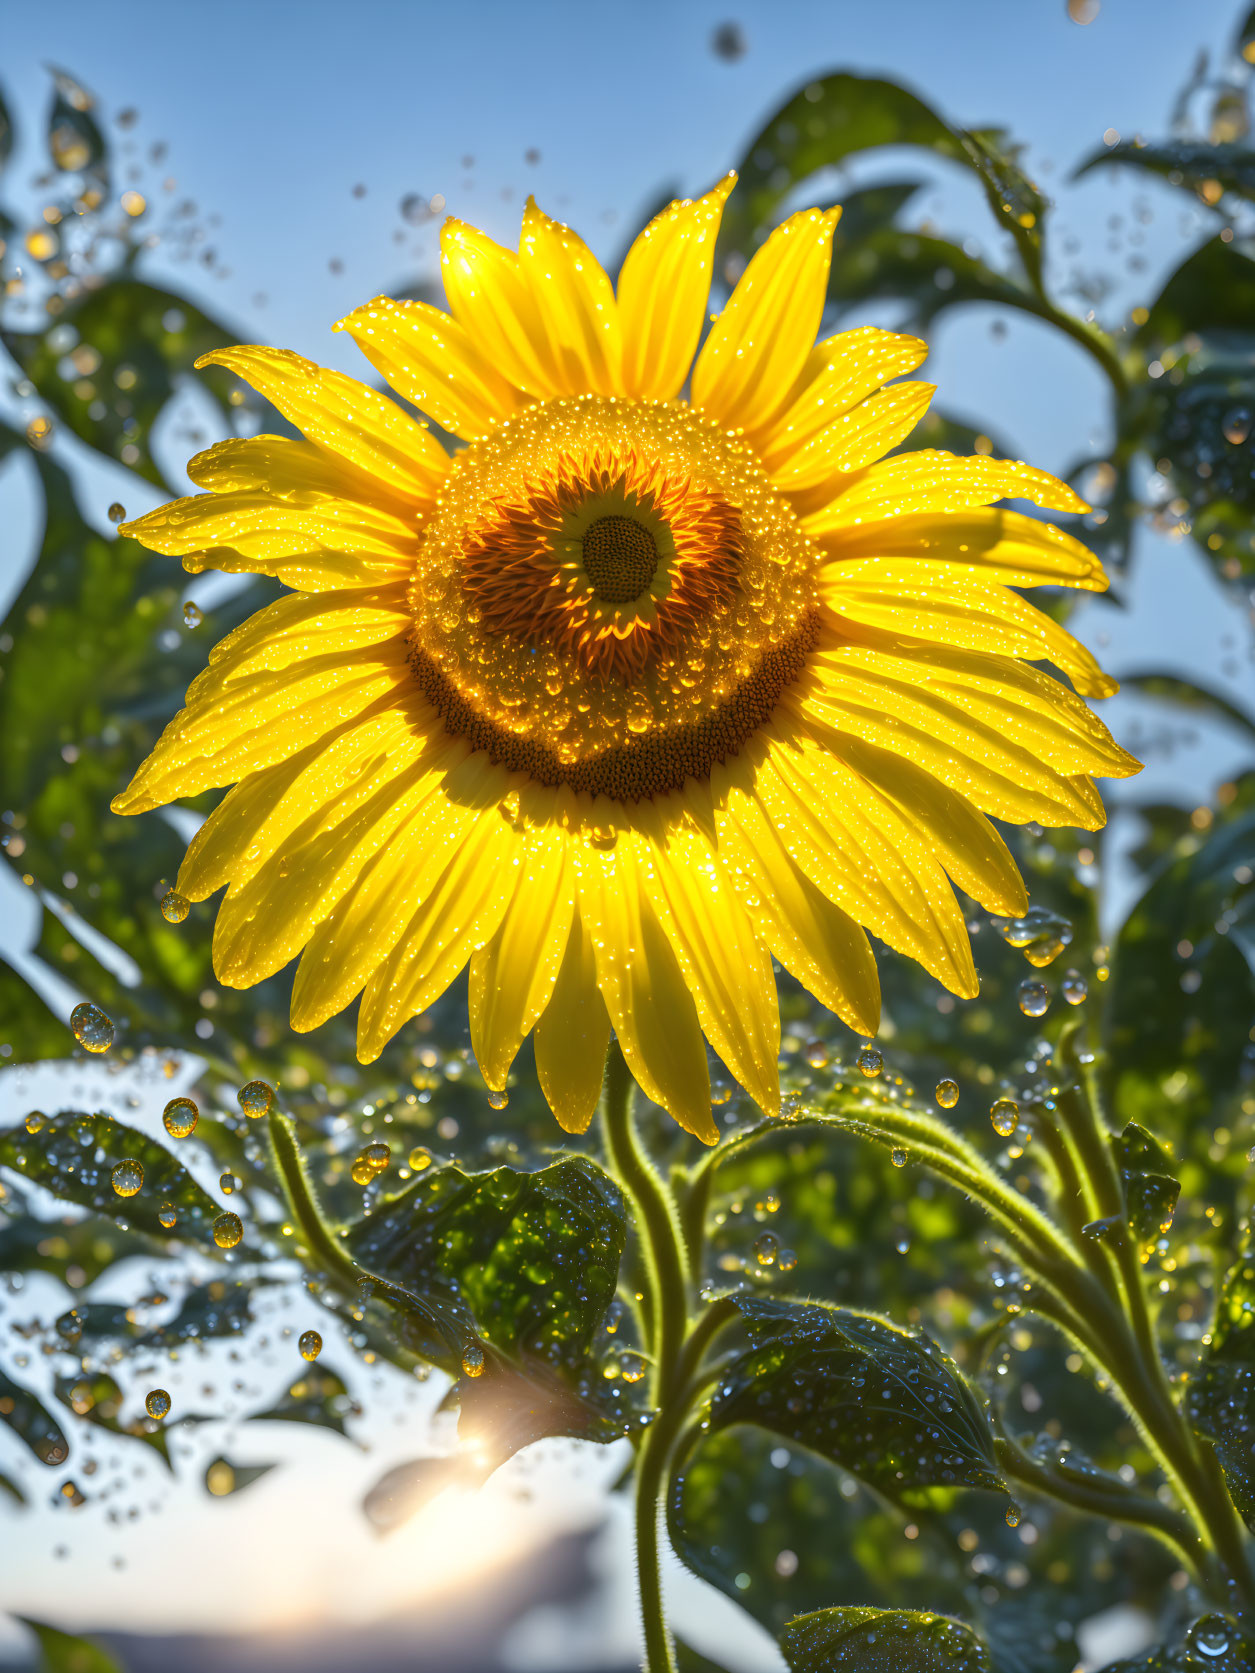 Sunflower with dewdrops on bright petals under clear blue sky